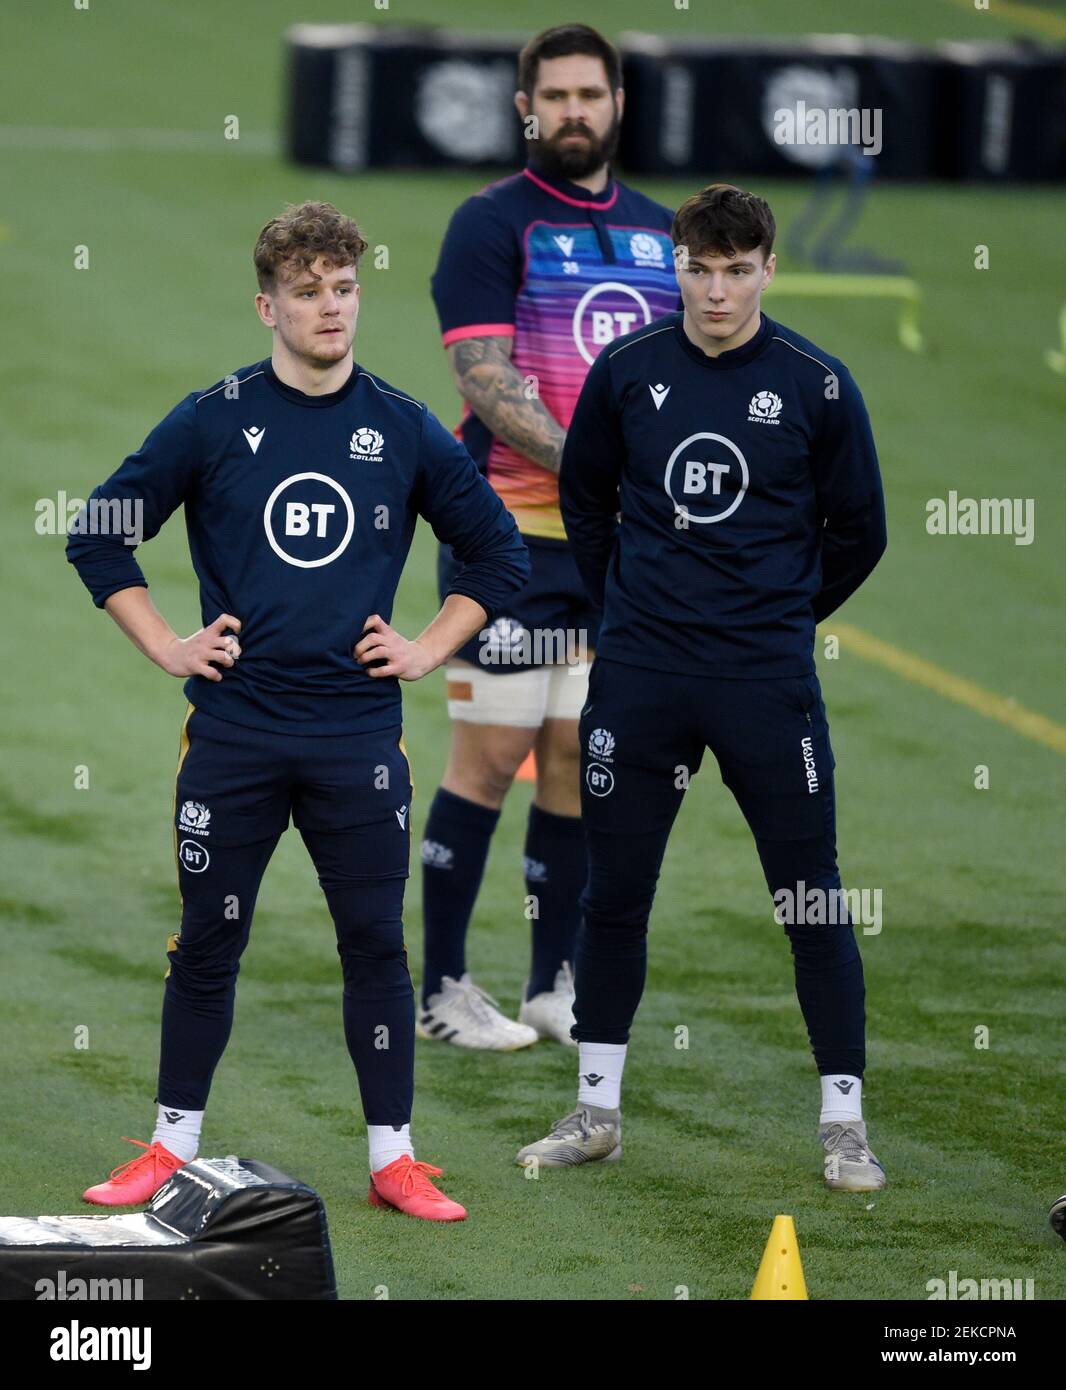 Guinness Six Nations Rugby 23rd February 2021: L to R, Scotland players Darcy Graham, Cornell du Preez and Jamie Dobie during the Scotland squad training at the Oriam sports centre, Riccarton, Edinburgh, Scotland, UK.     Credit: Ian Rutherford/Alamy Live News. Stock Photo